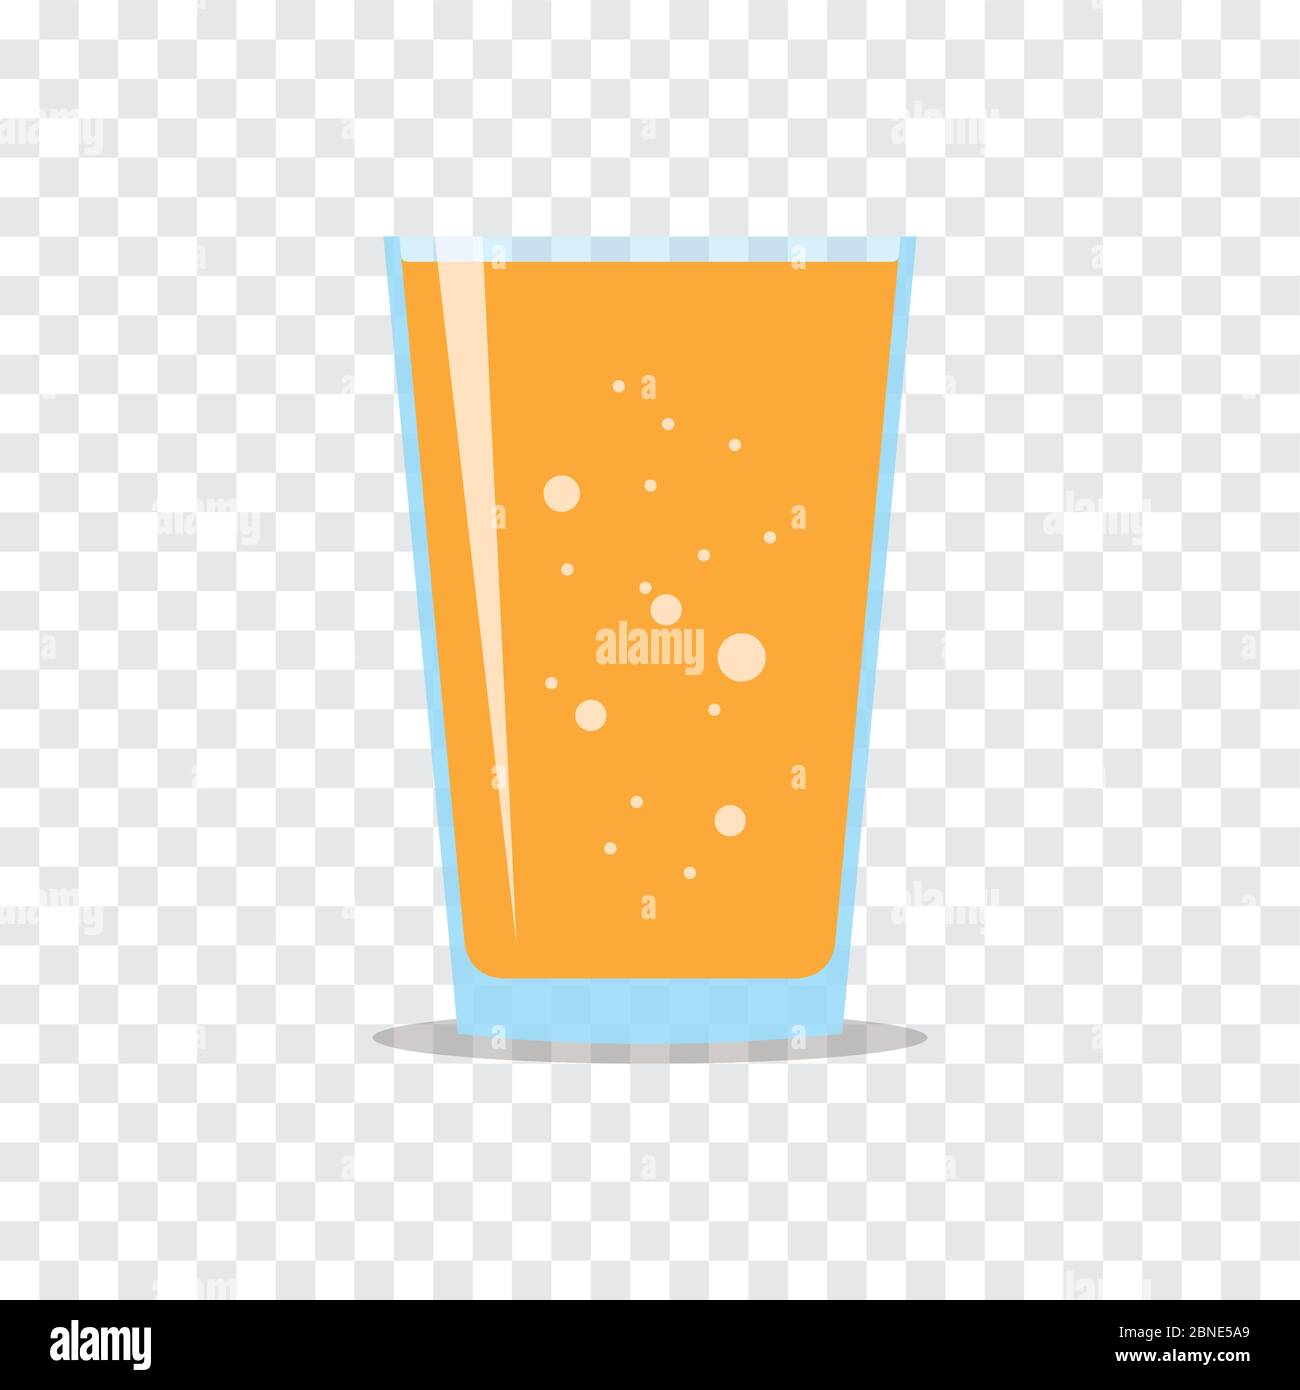 https://c8.alamy.com/comp/2BNE5A9/glass-full-of-fresh-sparkling-orange-juice-flat-icon-isolated-on-checkered-background-yellow-liquid-in-transparent-container-stylized-vector-eps10-2BNE5A9.jpg